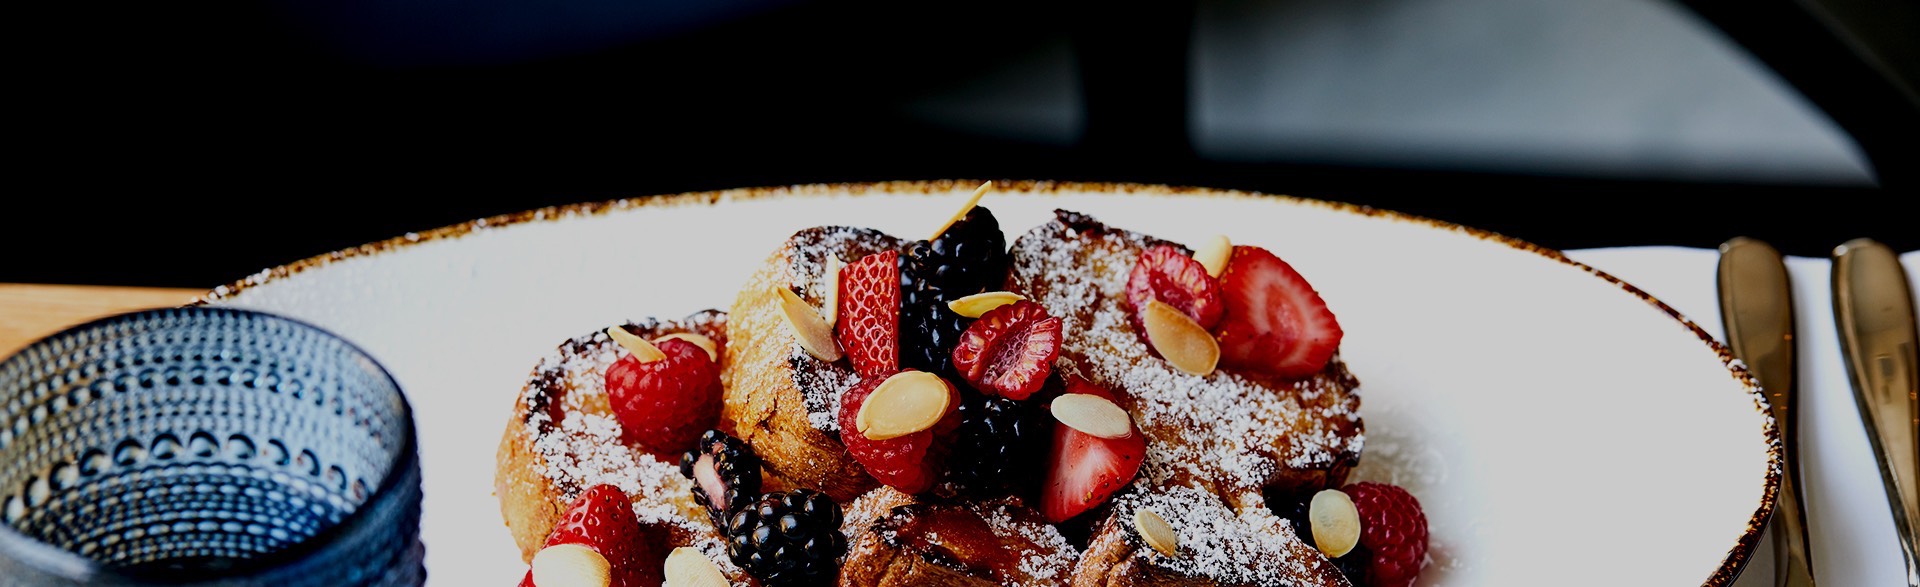 french toast with berry garnishes